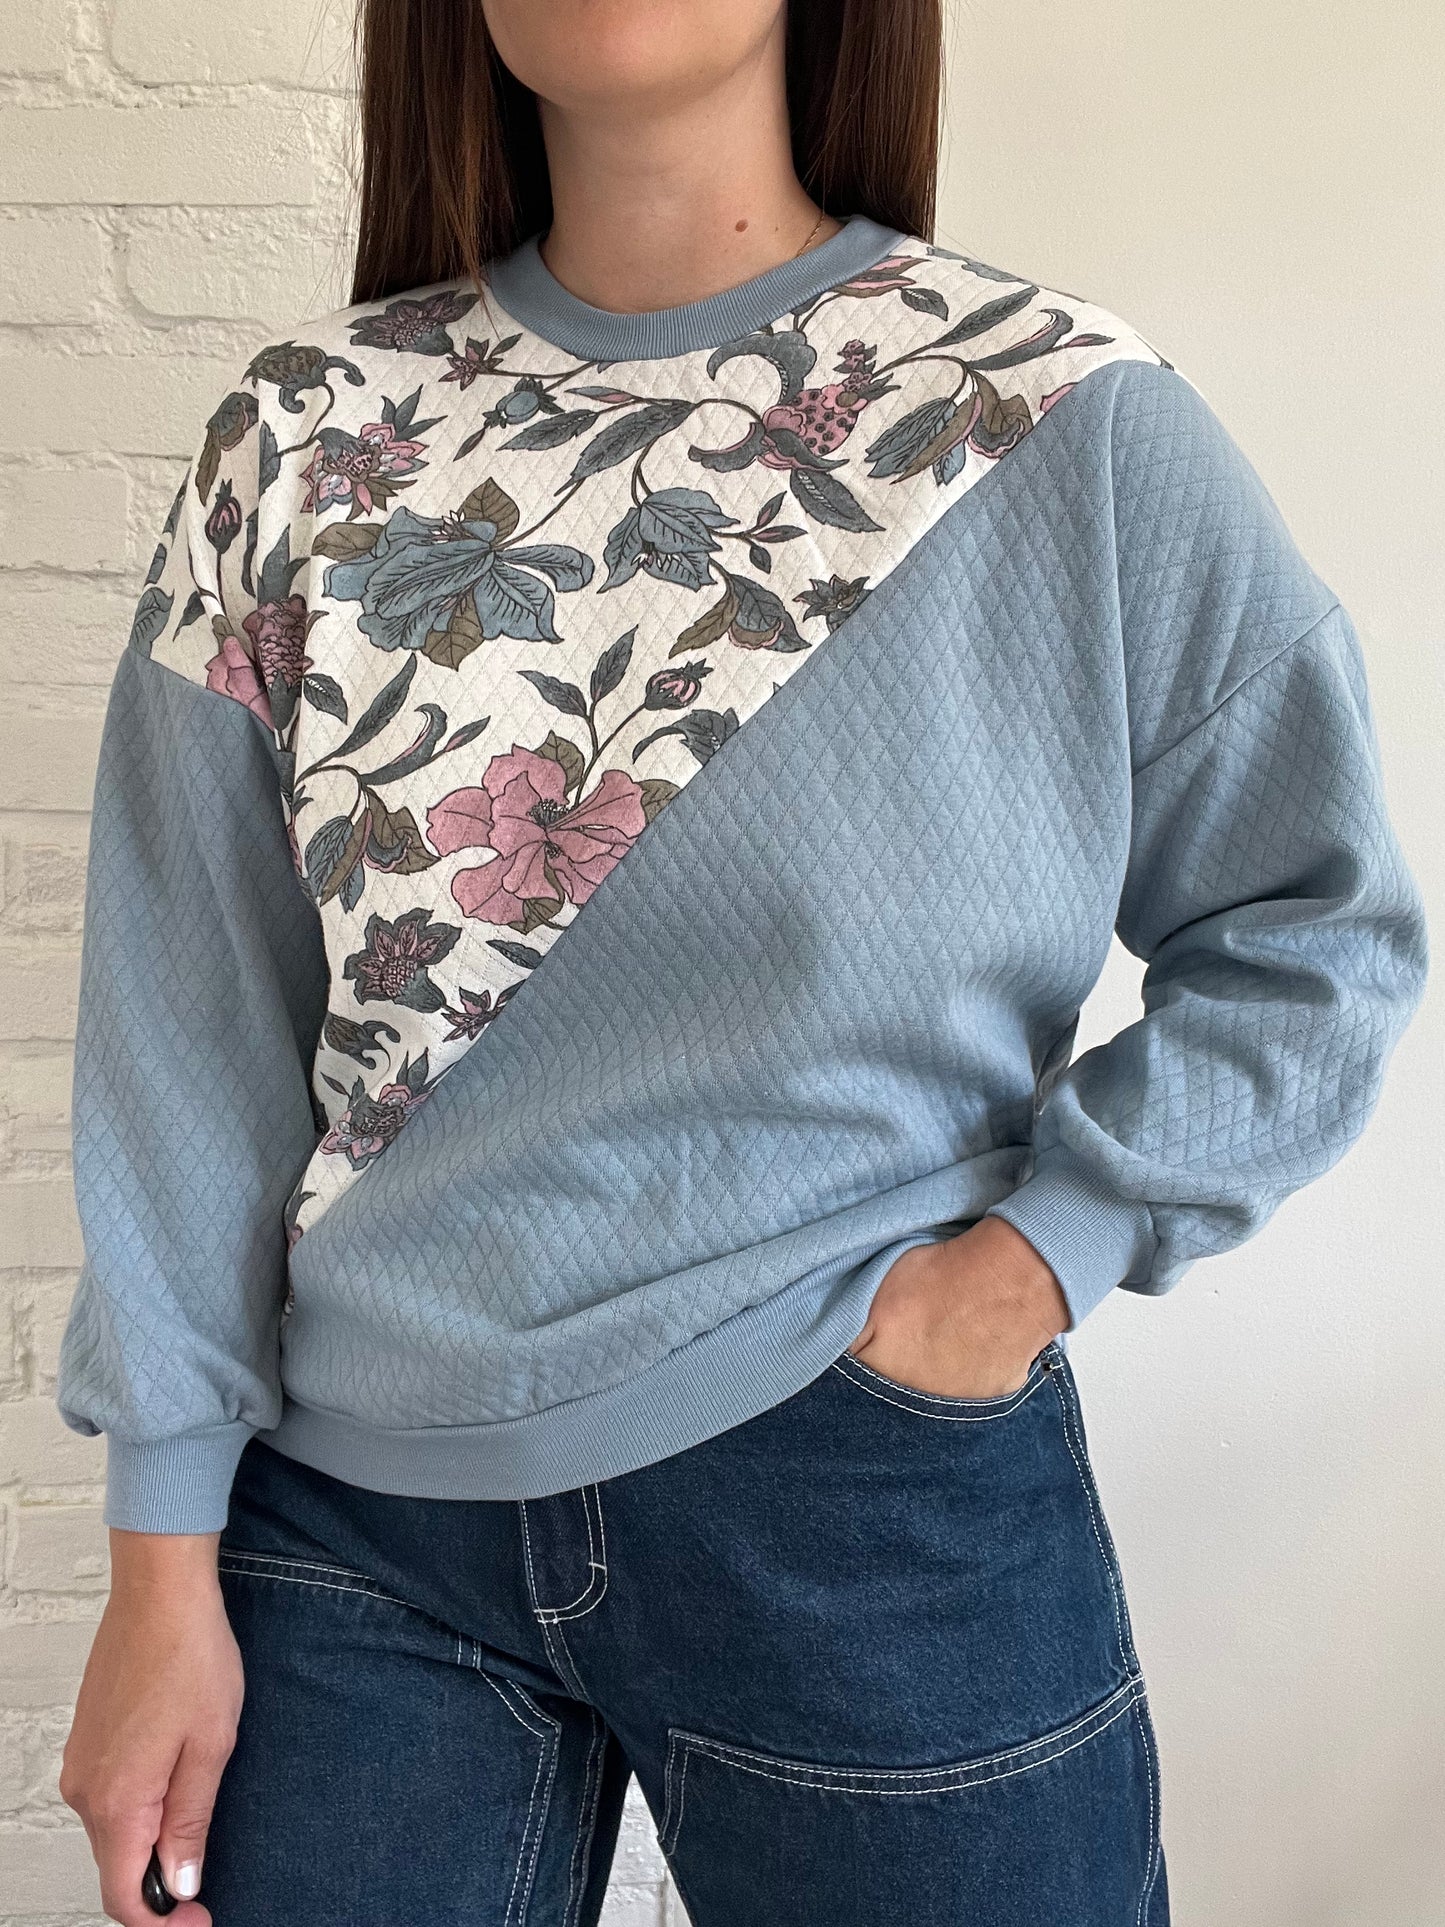 Quilted Floral Crewneck - S/M